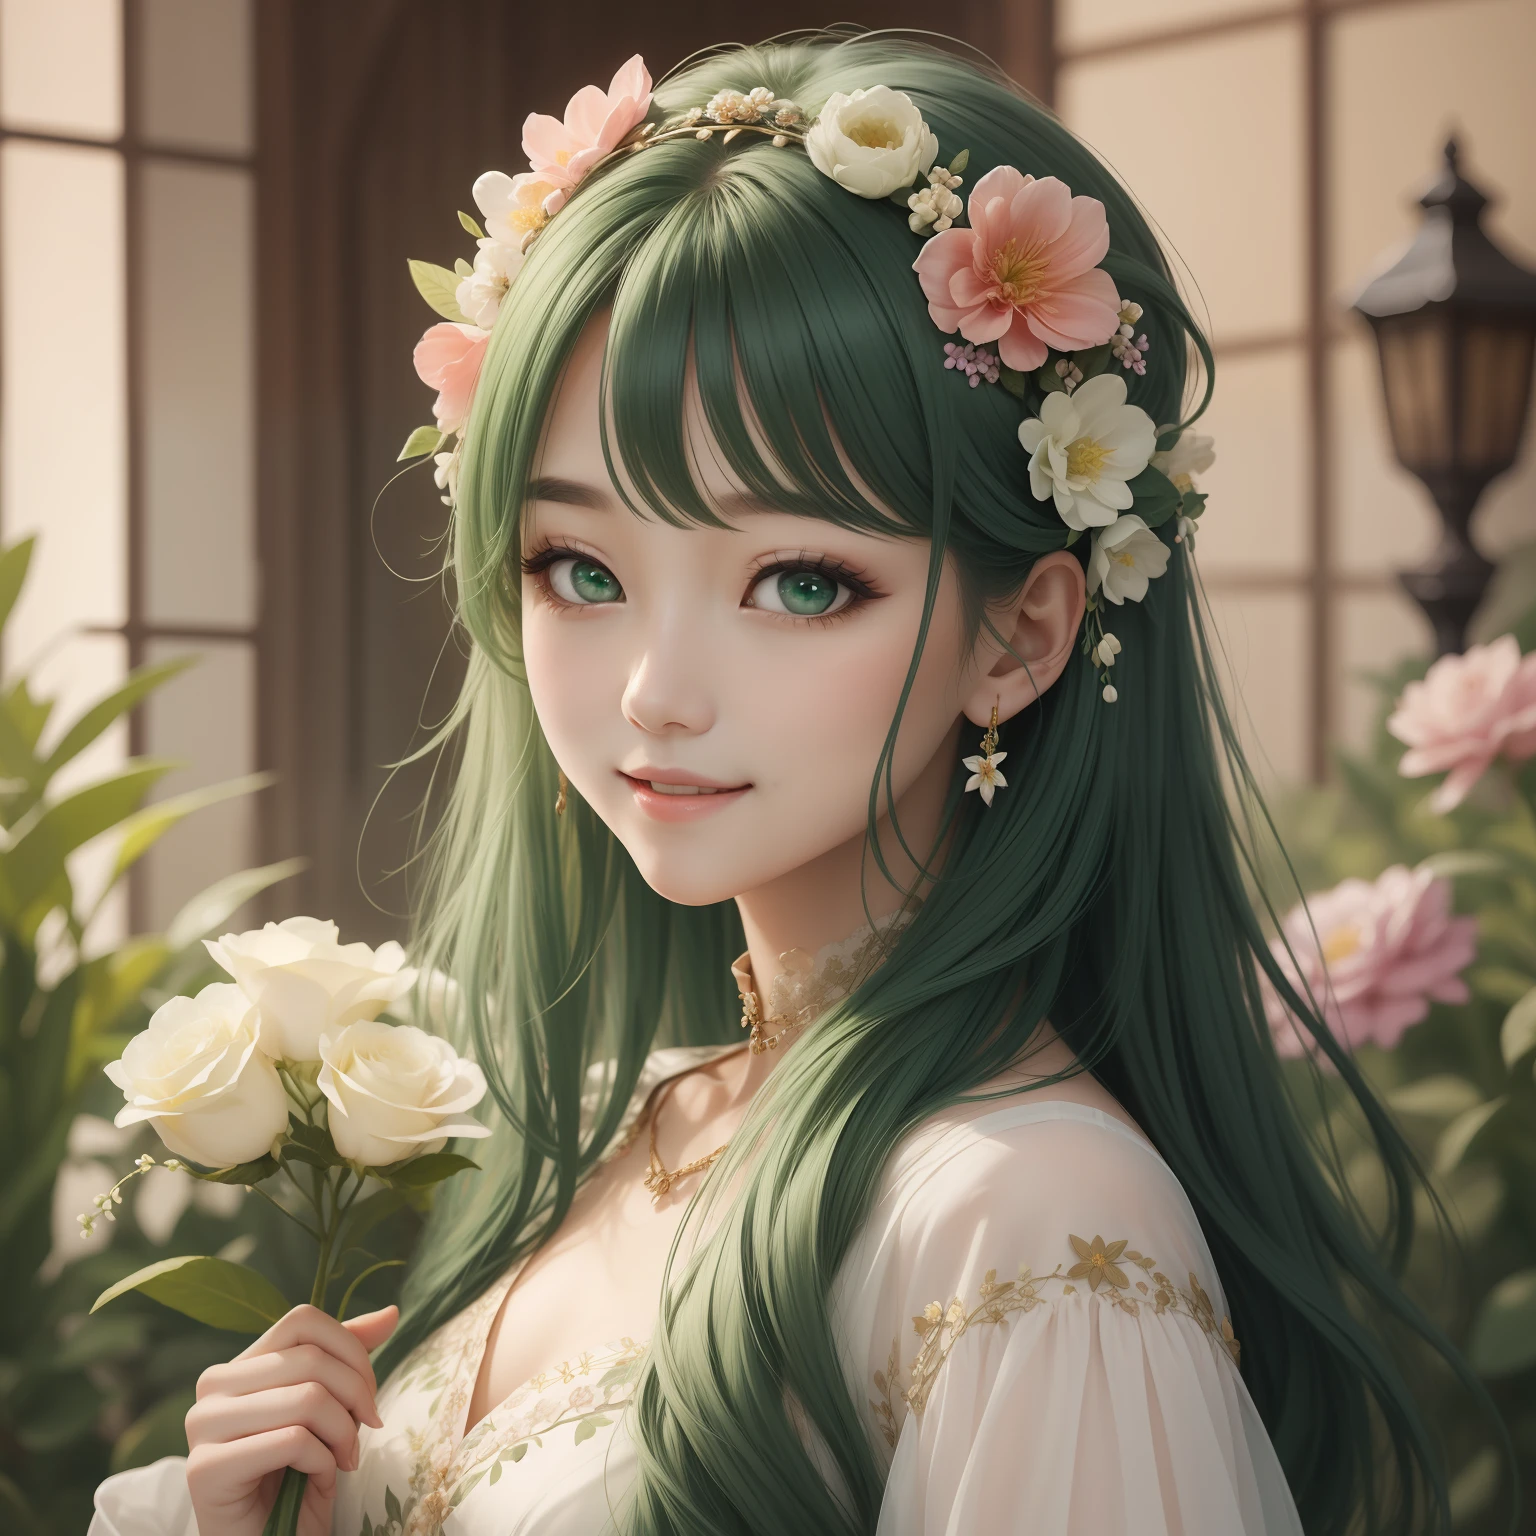 （MASTERPIECE）8K resolution、Beautiful woman loving flowers、brond、Long、Floral hair ornament on the head、Green eyes、adorable face、Sorrisoodel style、Fantasy style、